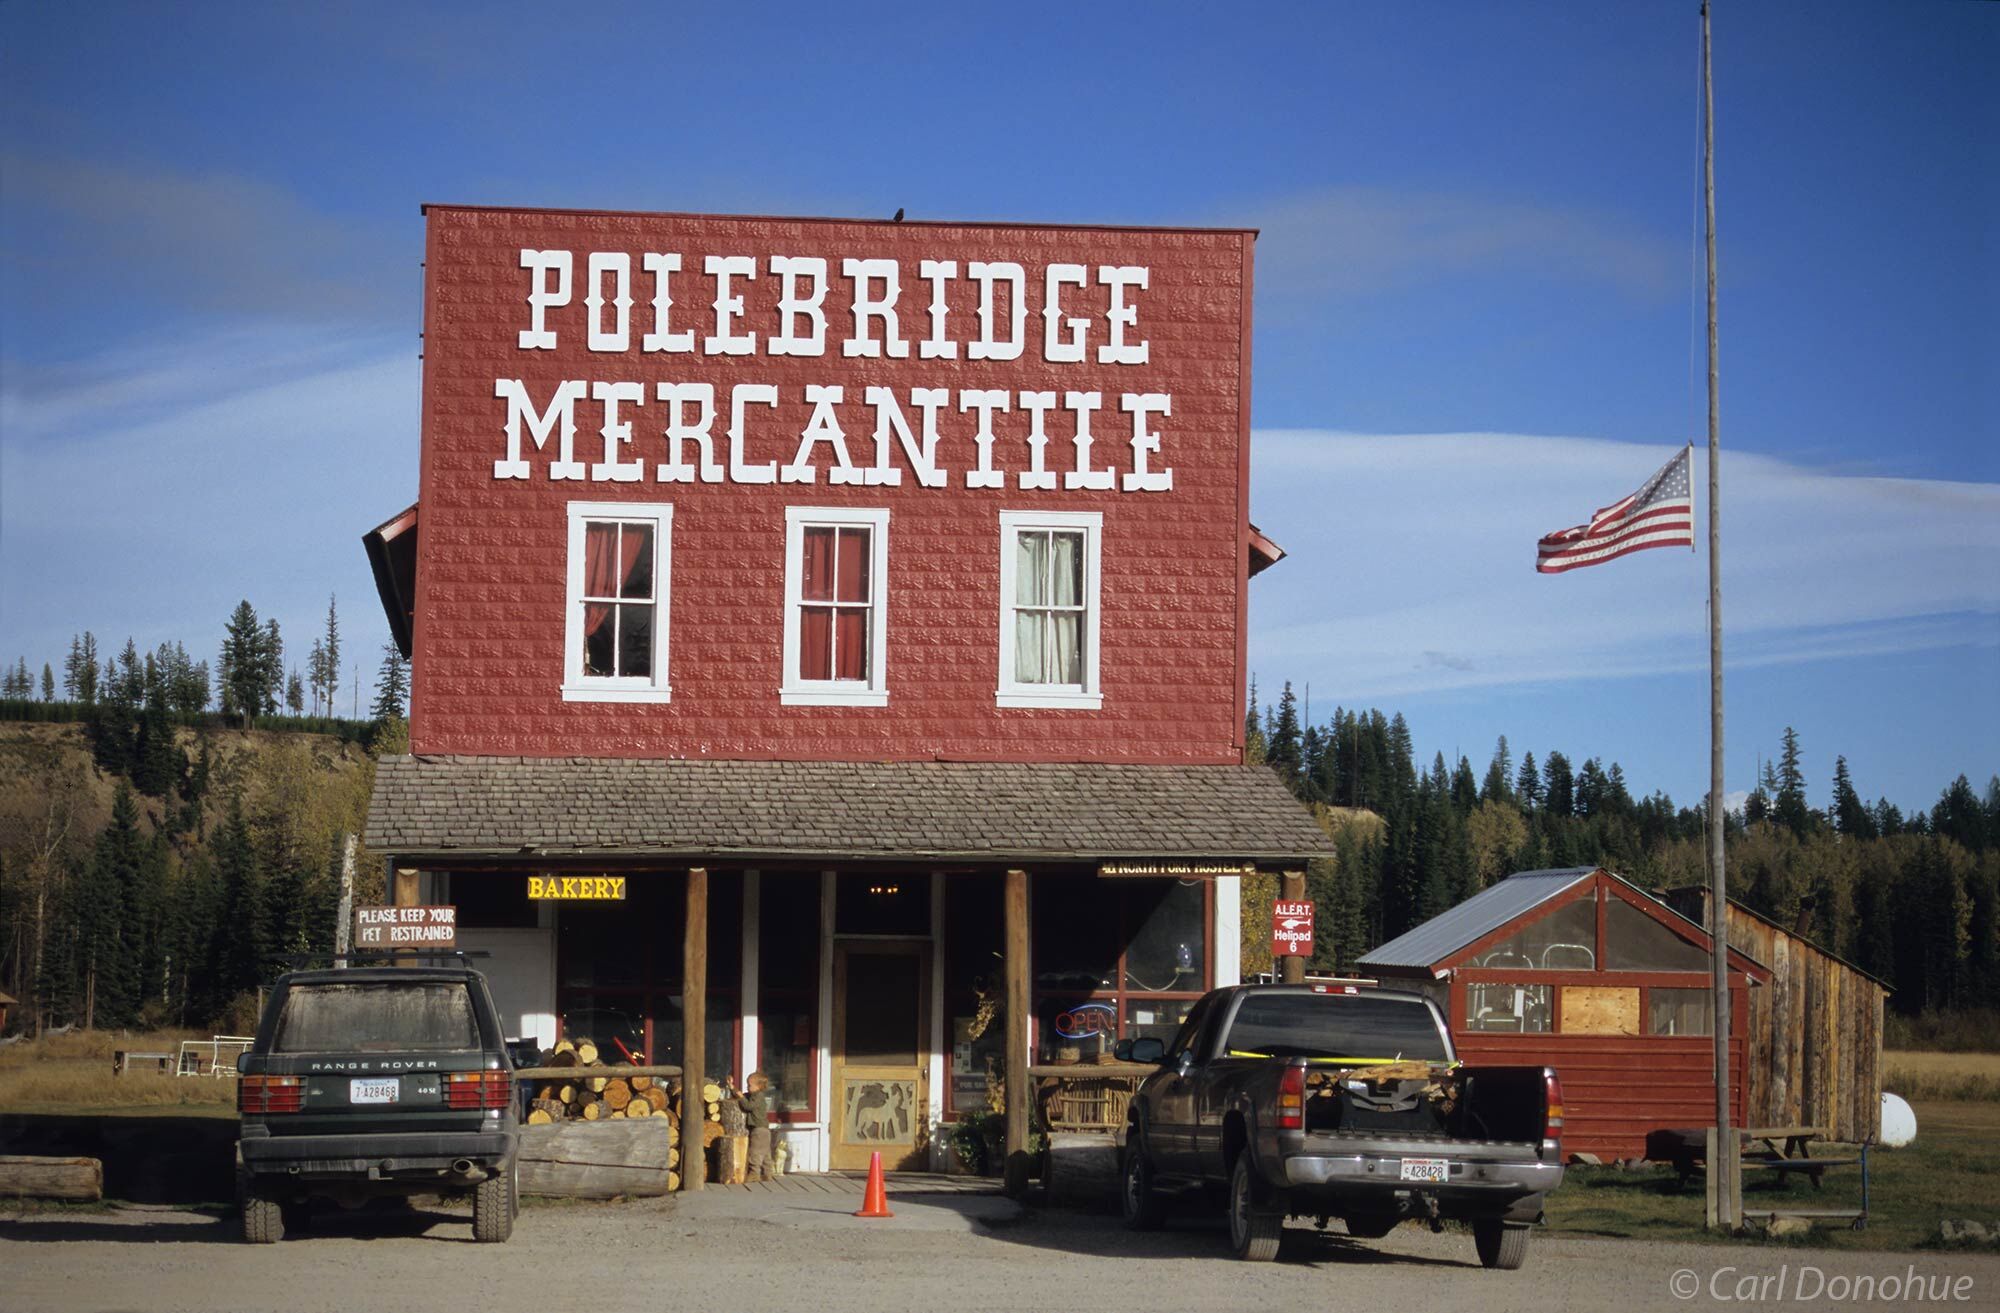 The small but well-known mercantile general store of Polebridge, Flathead River country, outside Glacier National Park, Montana.